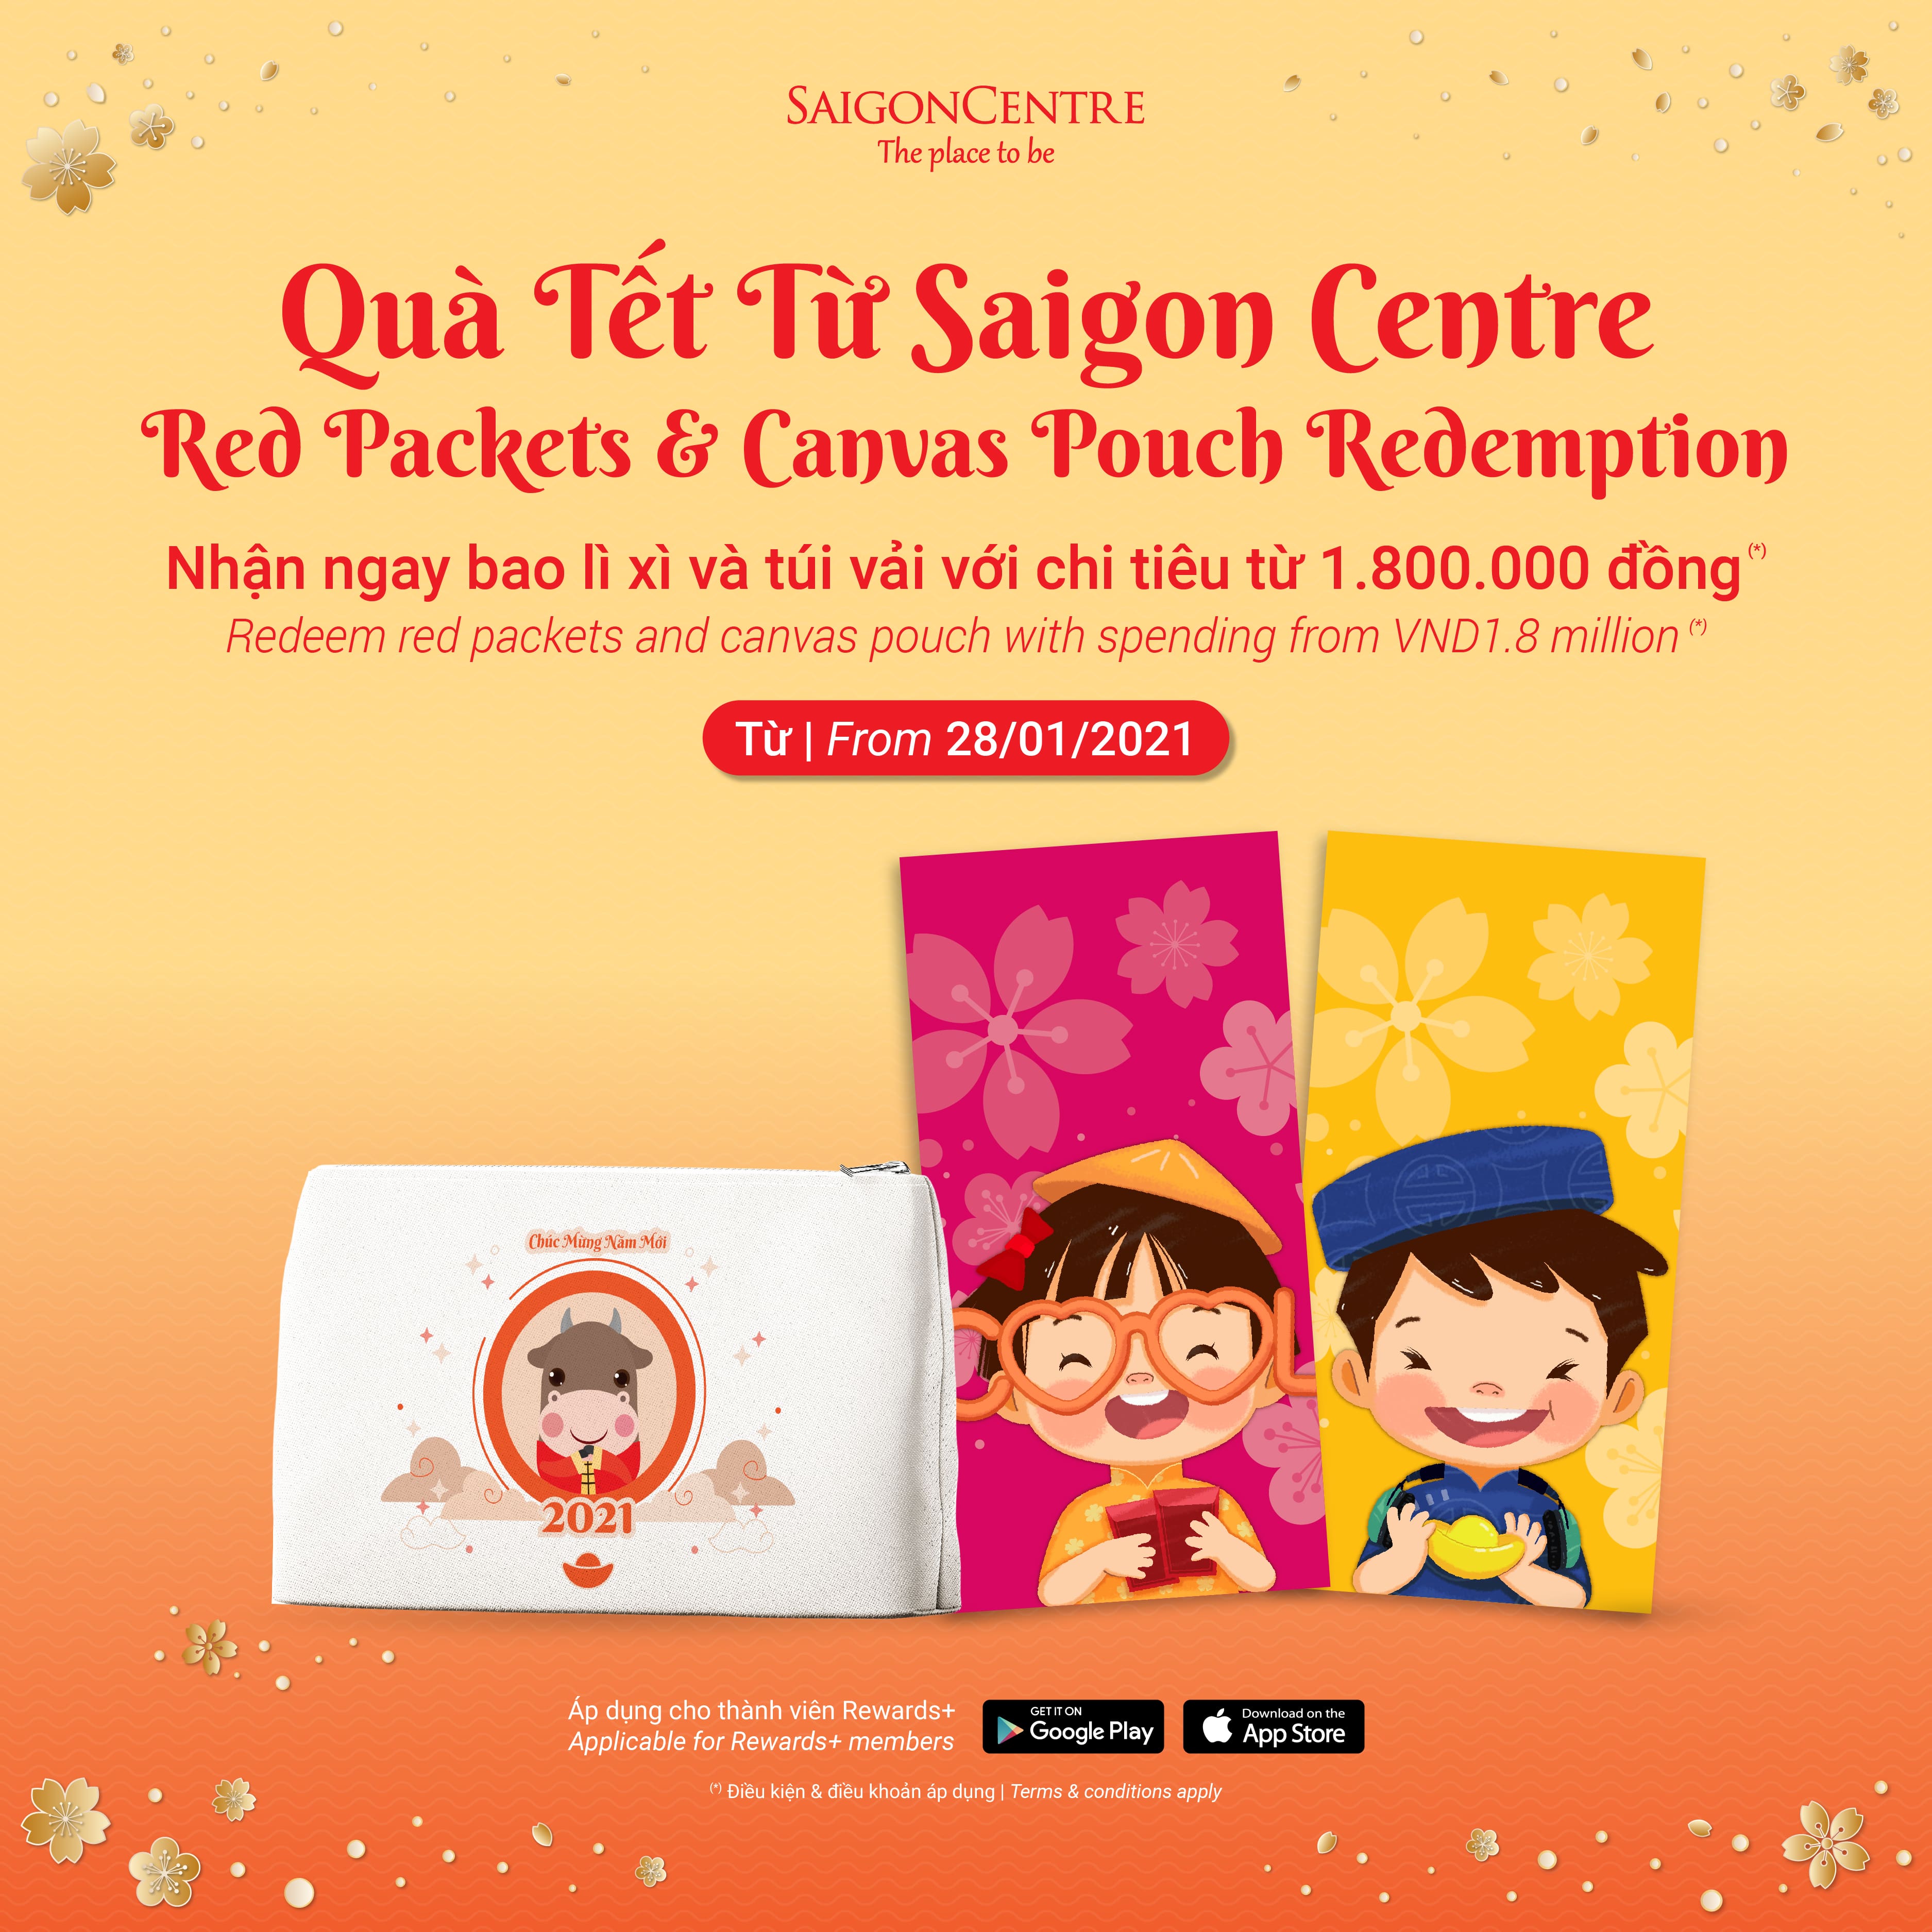 REDEEM TET GIFTS WITH SPENDING FROM VND1.8M OR 18K POINTS